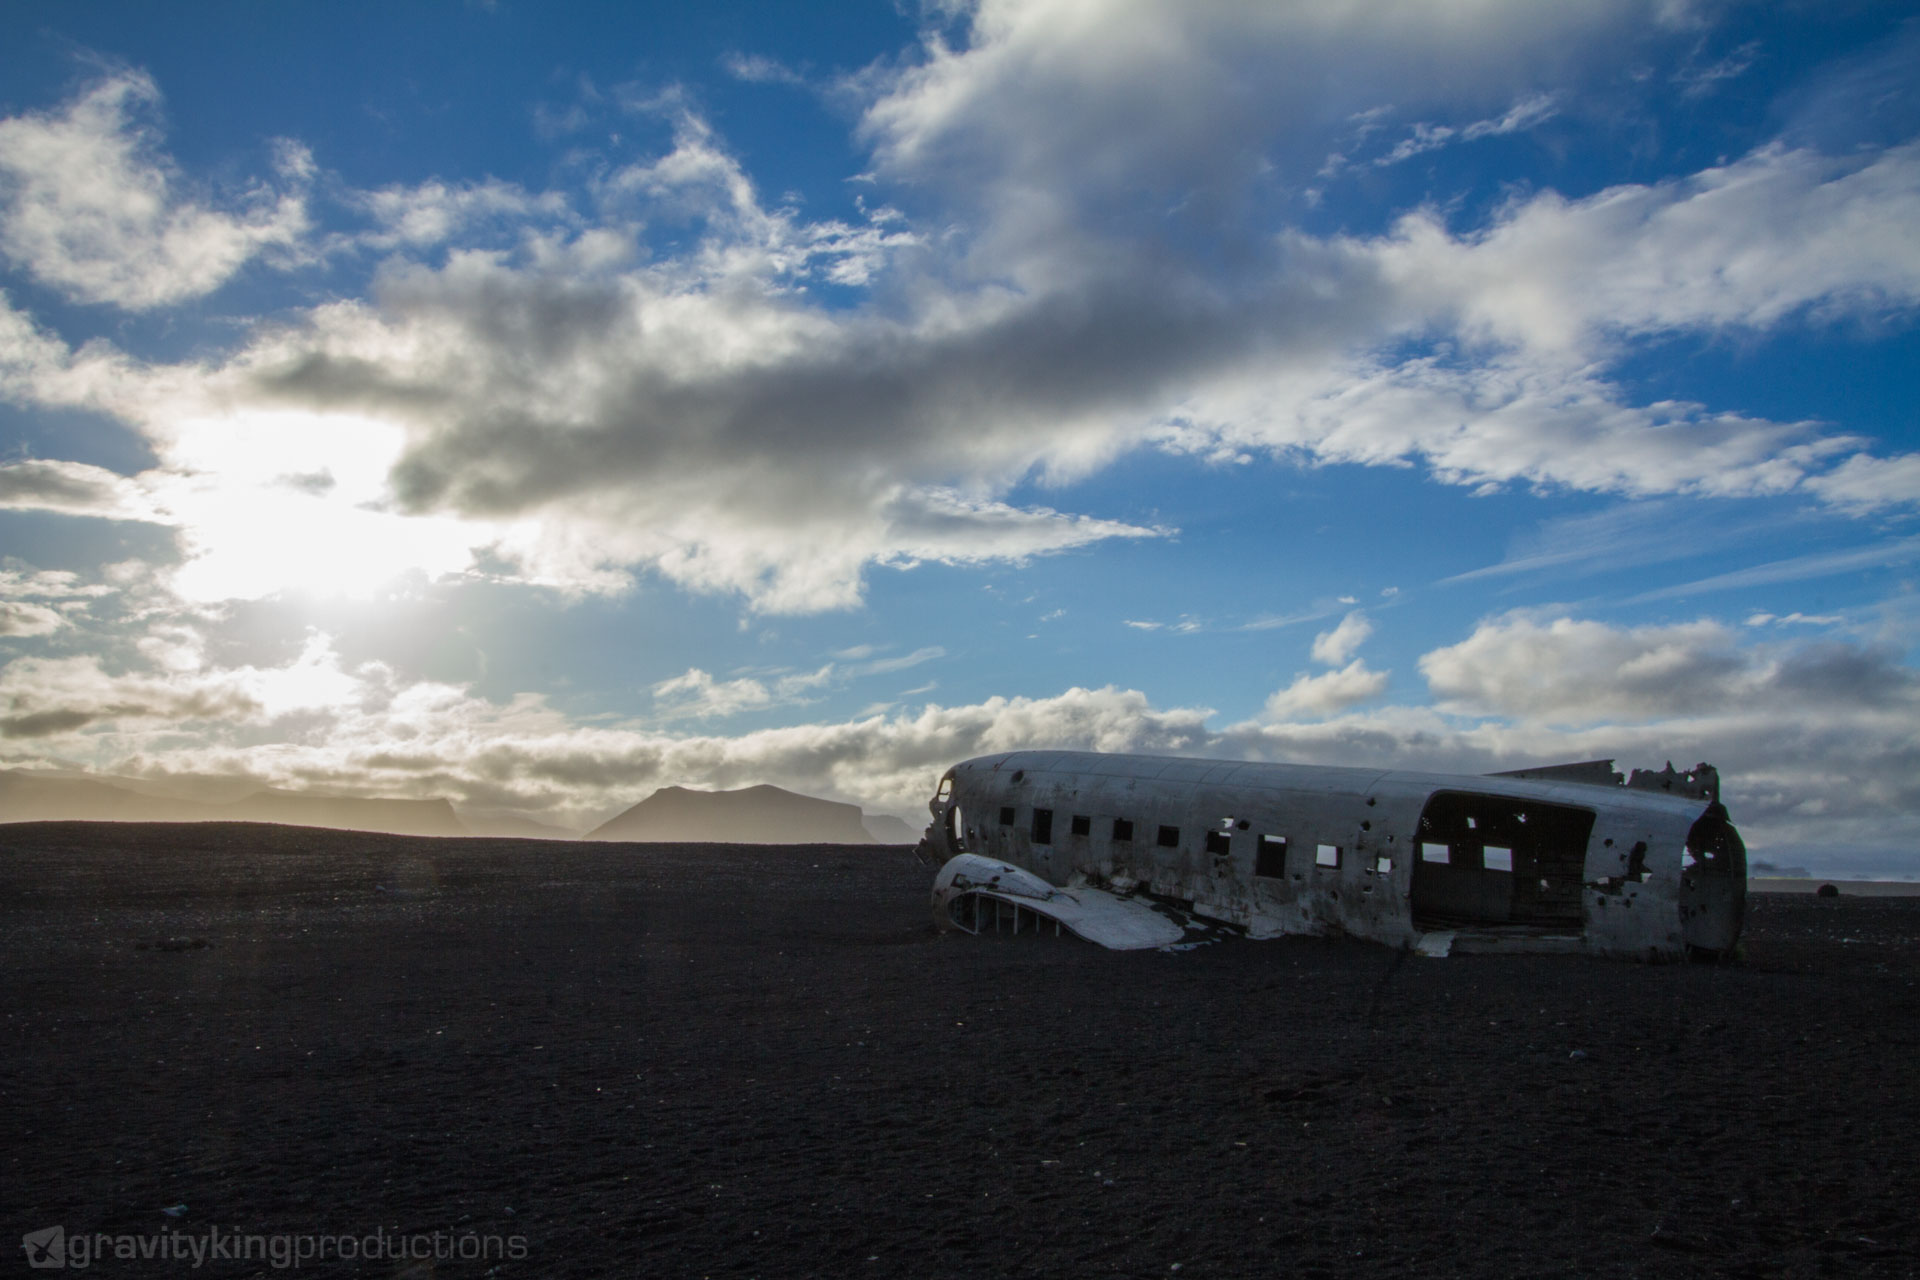 The famous DC-3 wreck on the south coast of Iceland. I wonder where the wings are?